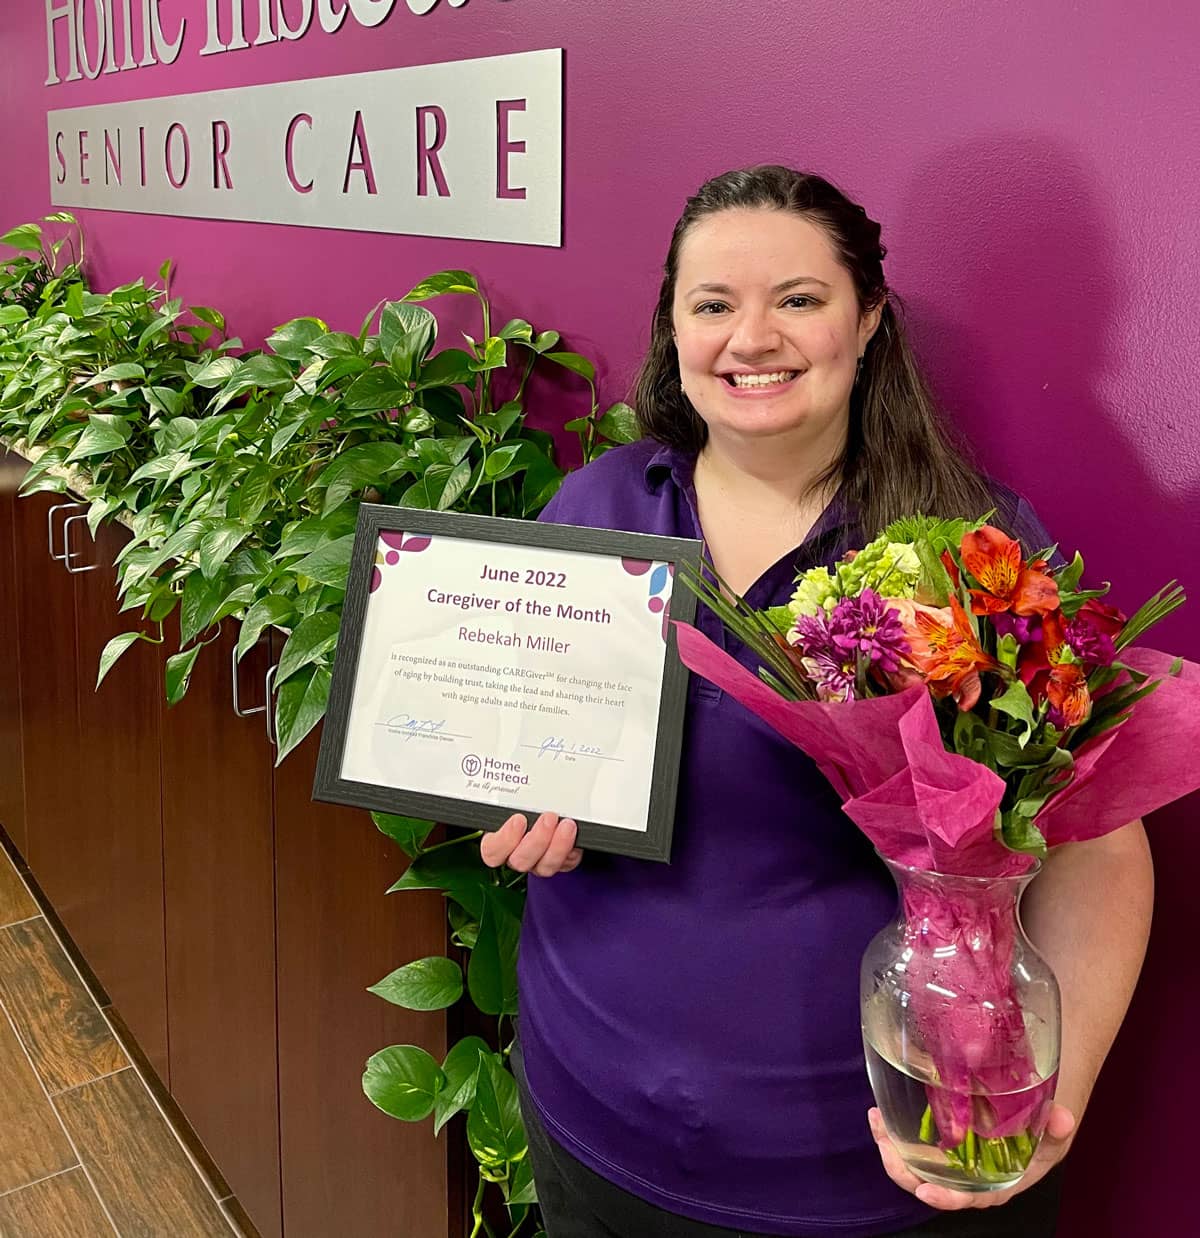 June 2022 Care Professional of the Month - Rebekah M.